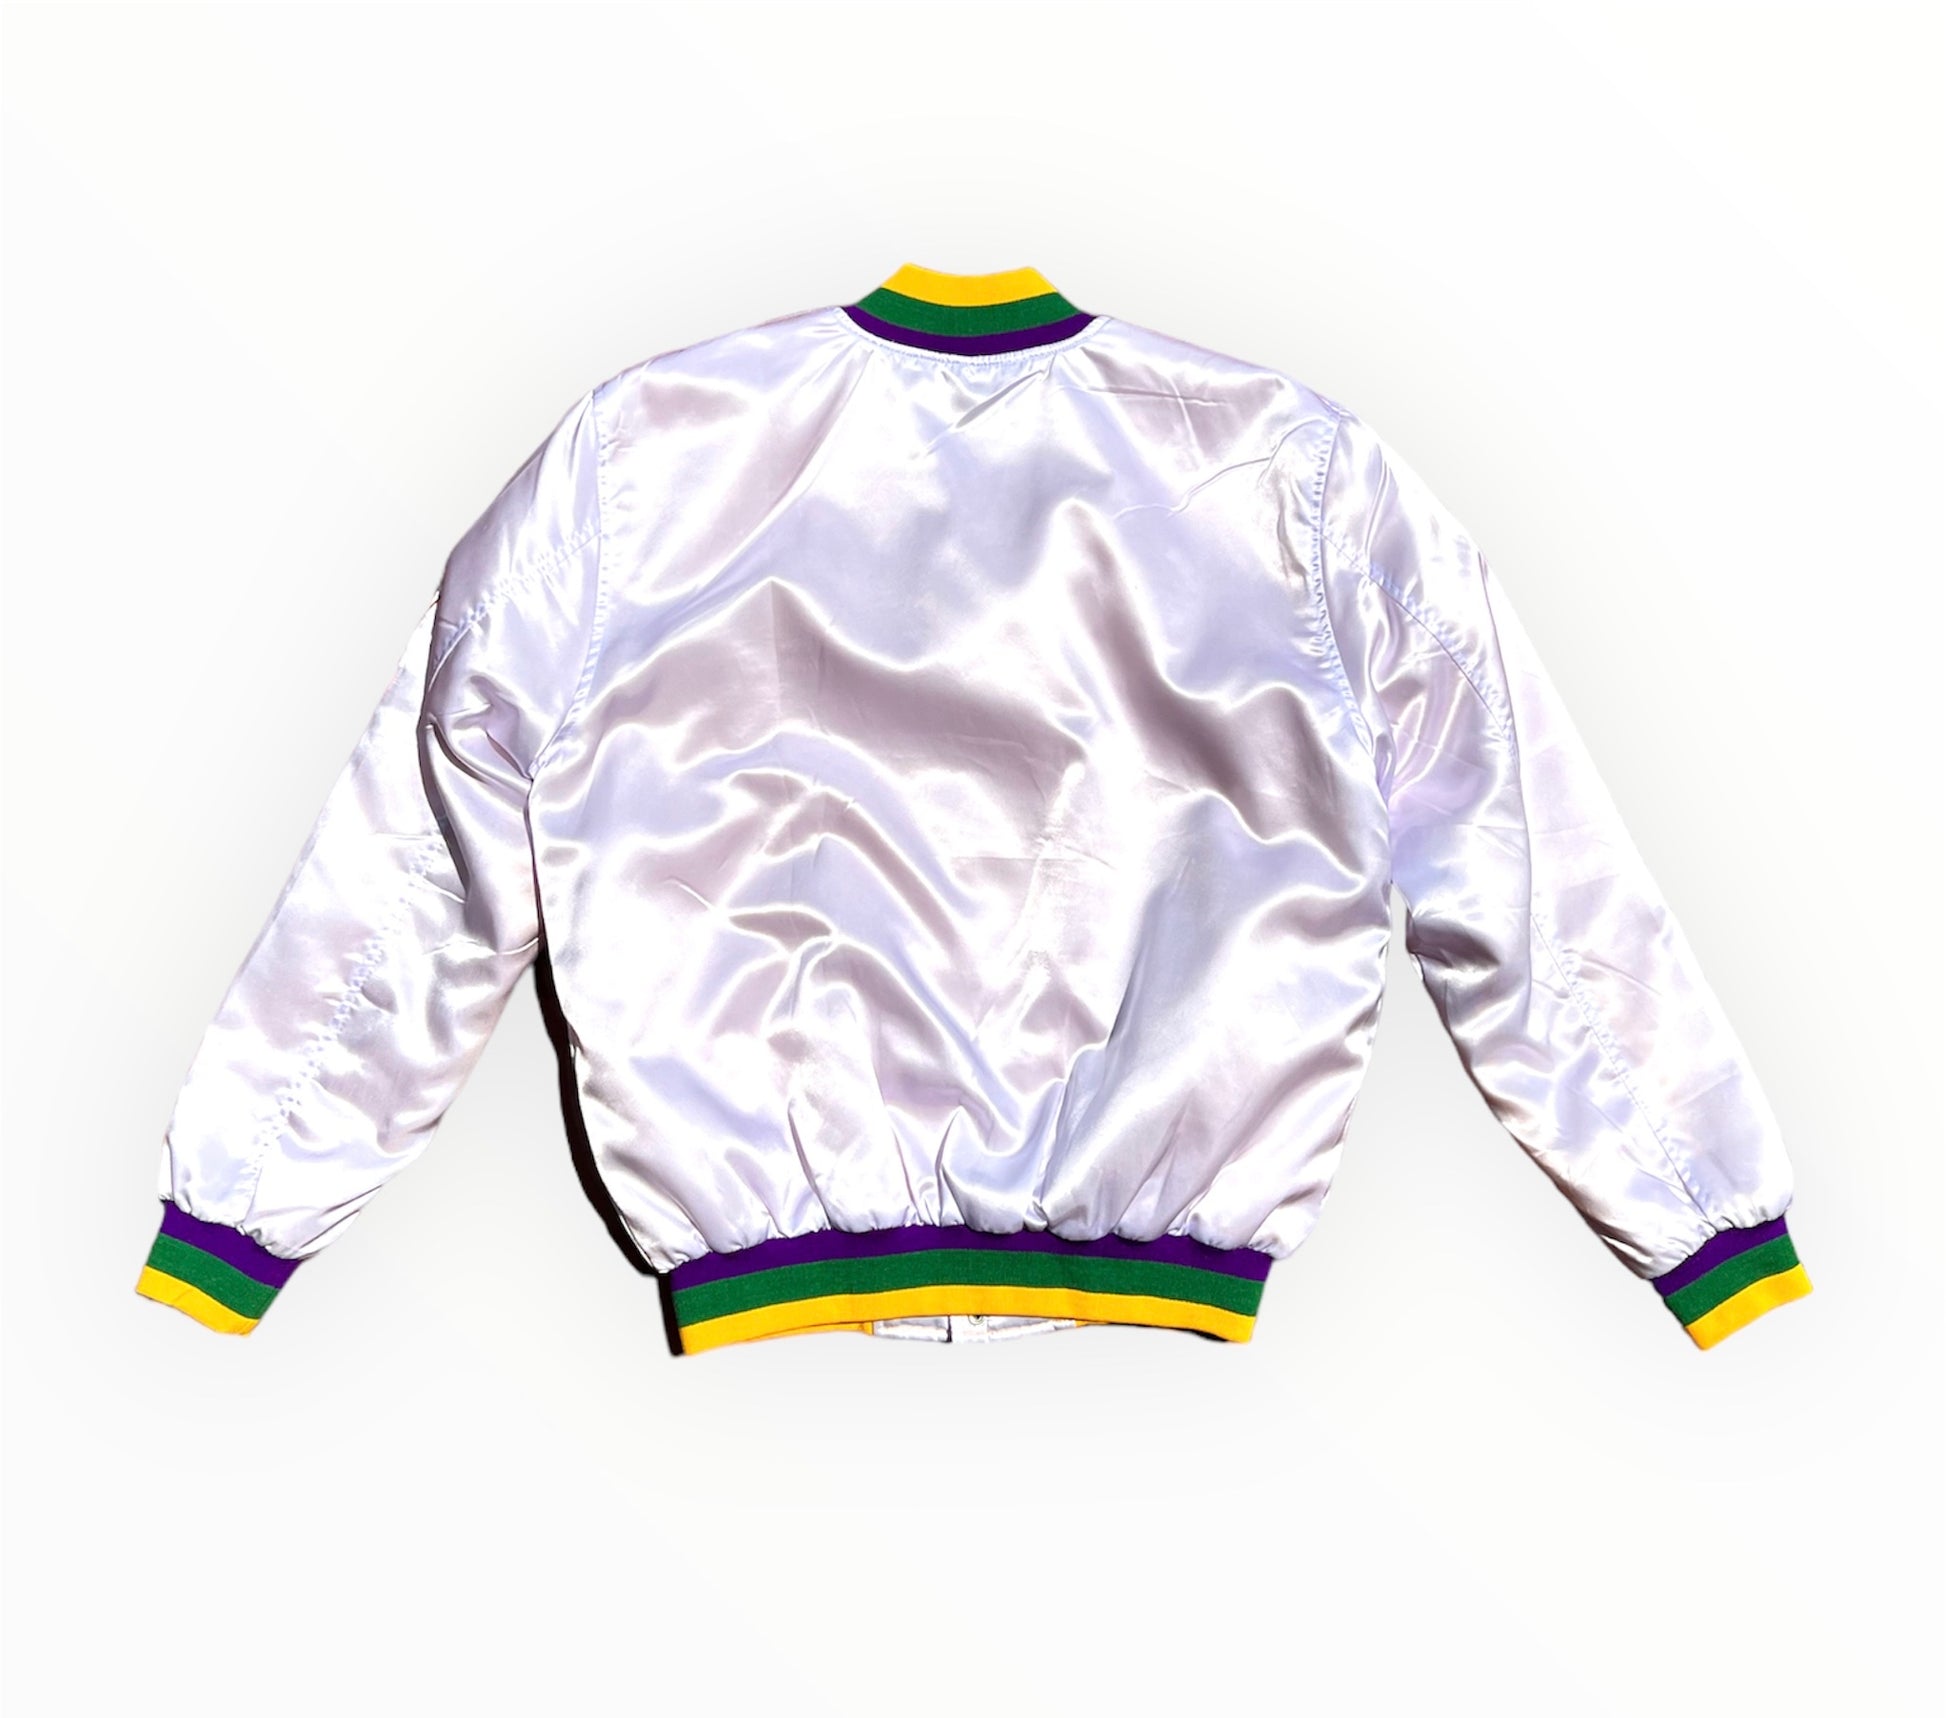 Back View of Royalty10 Mardi Gras '19 Satin Bomber Jacket in Elegant White with Lion & Egyptian Embroidery